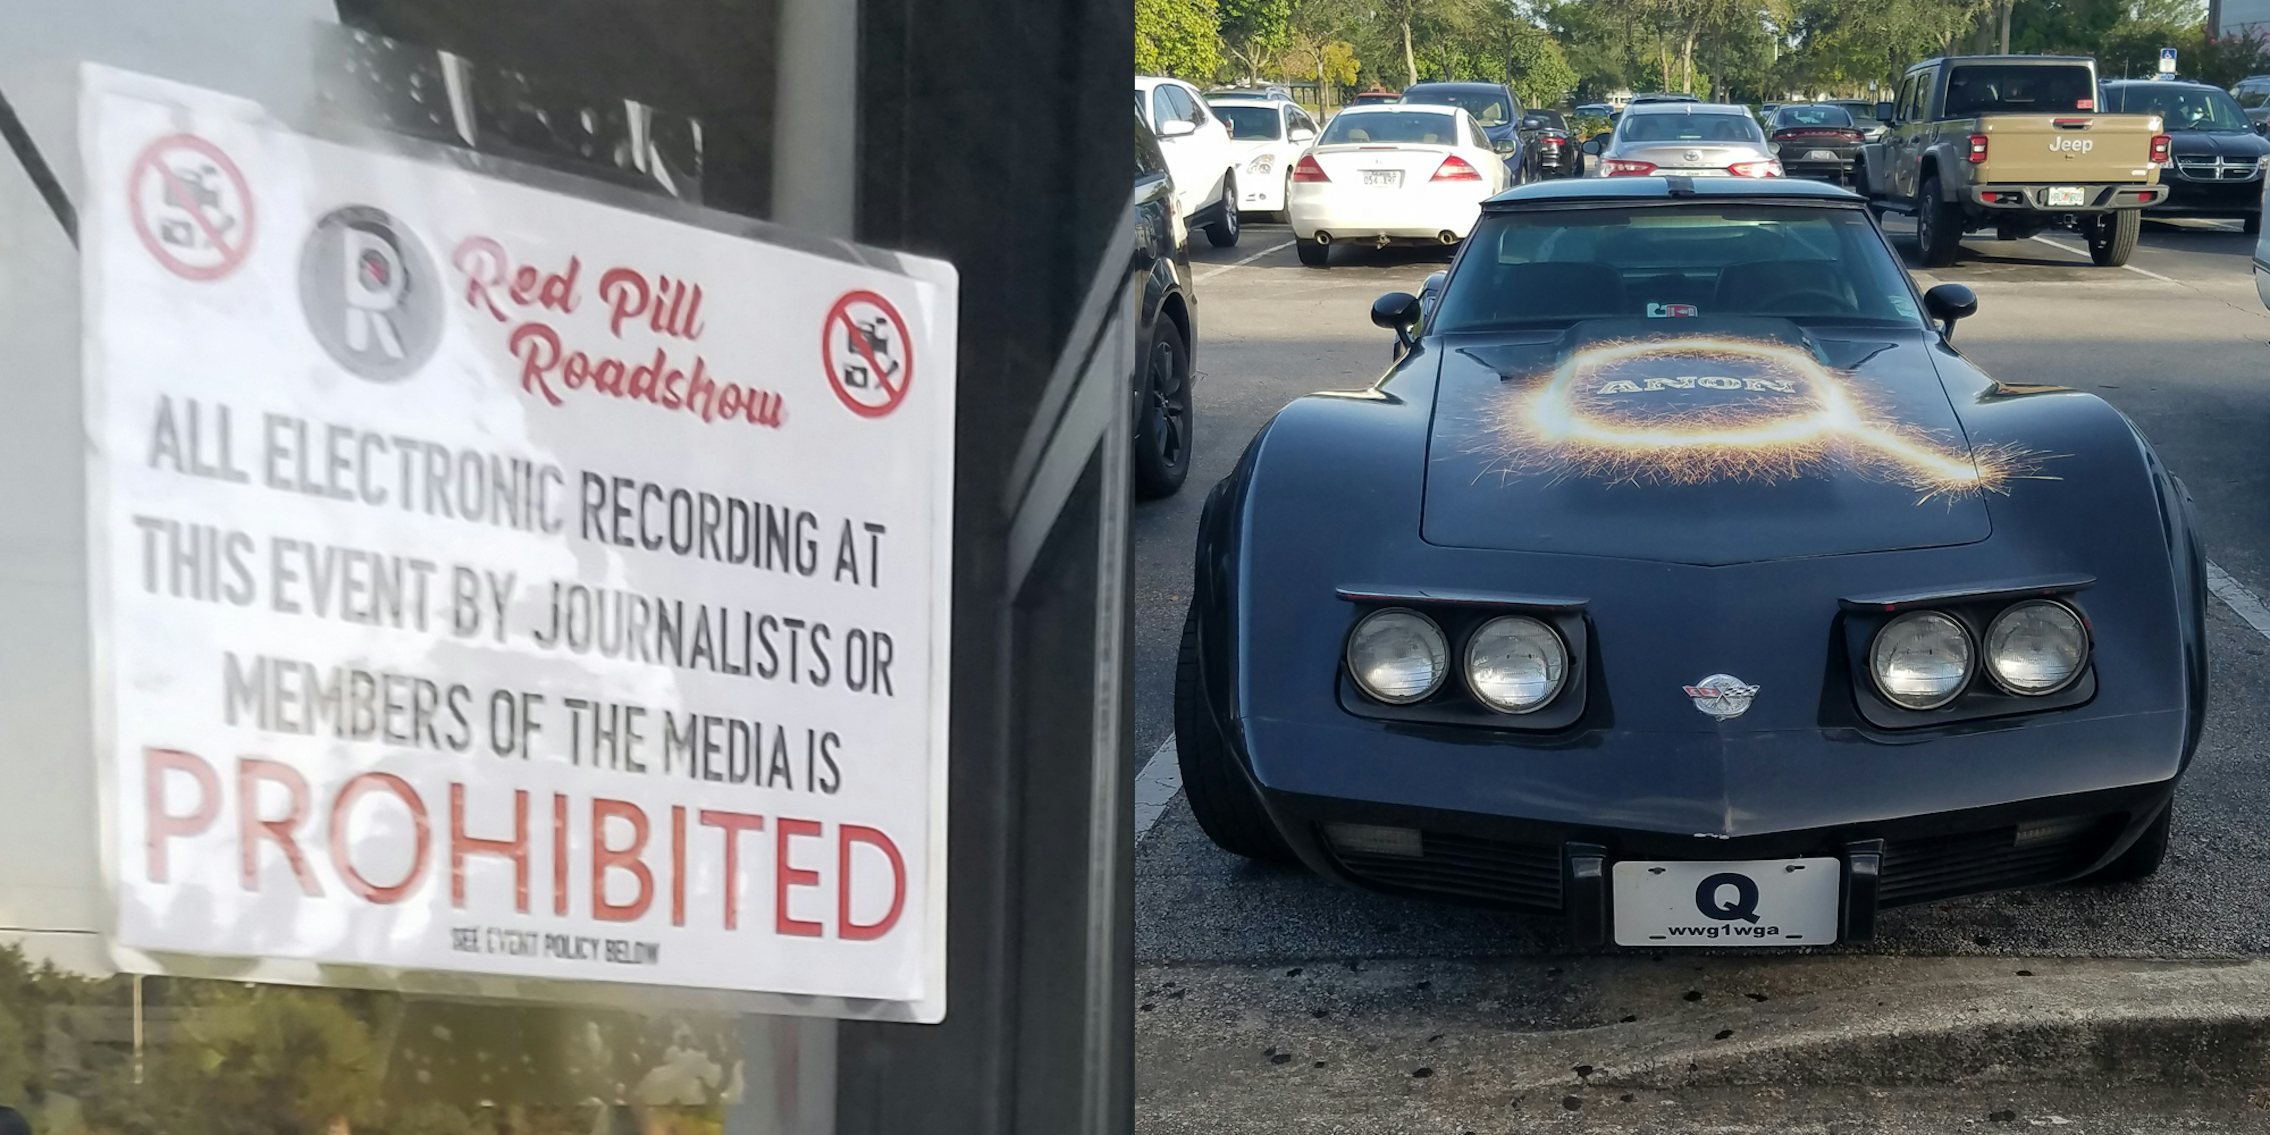 red pill roadshow sign 'all electronic recording at this event by journalists or members of the media is prohibited' with corvette painted with Qanon logo on hood